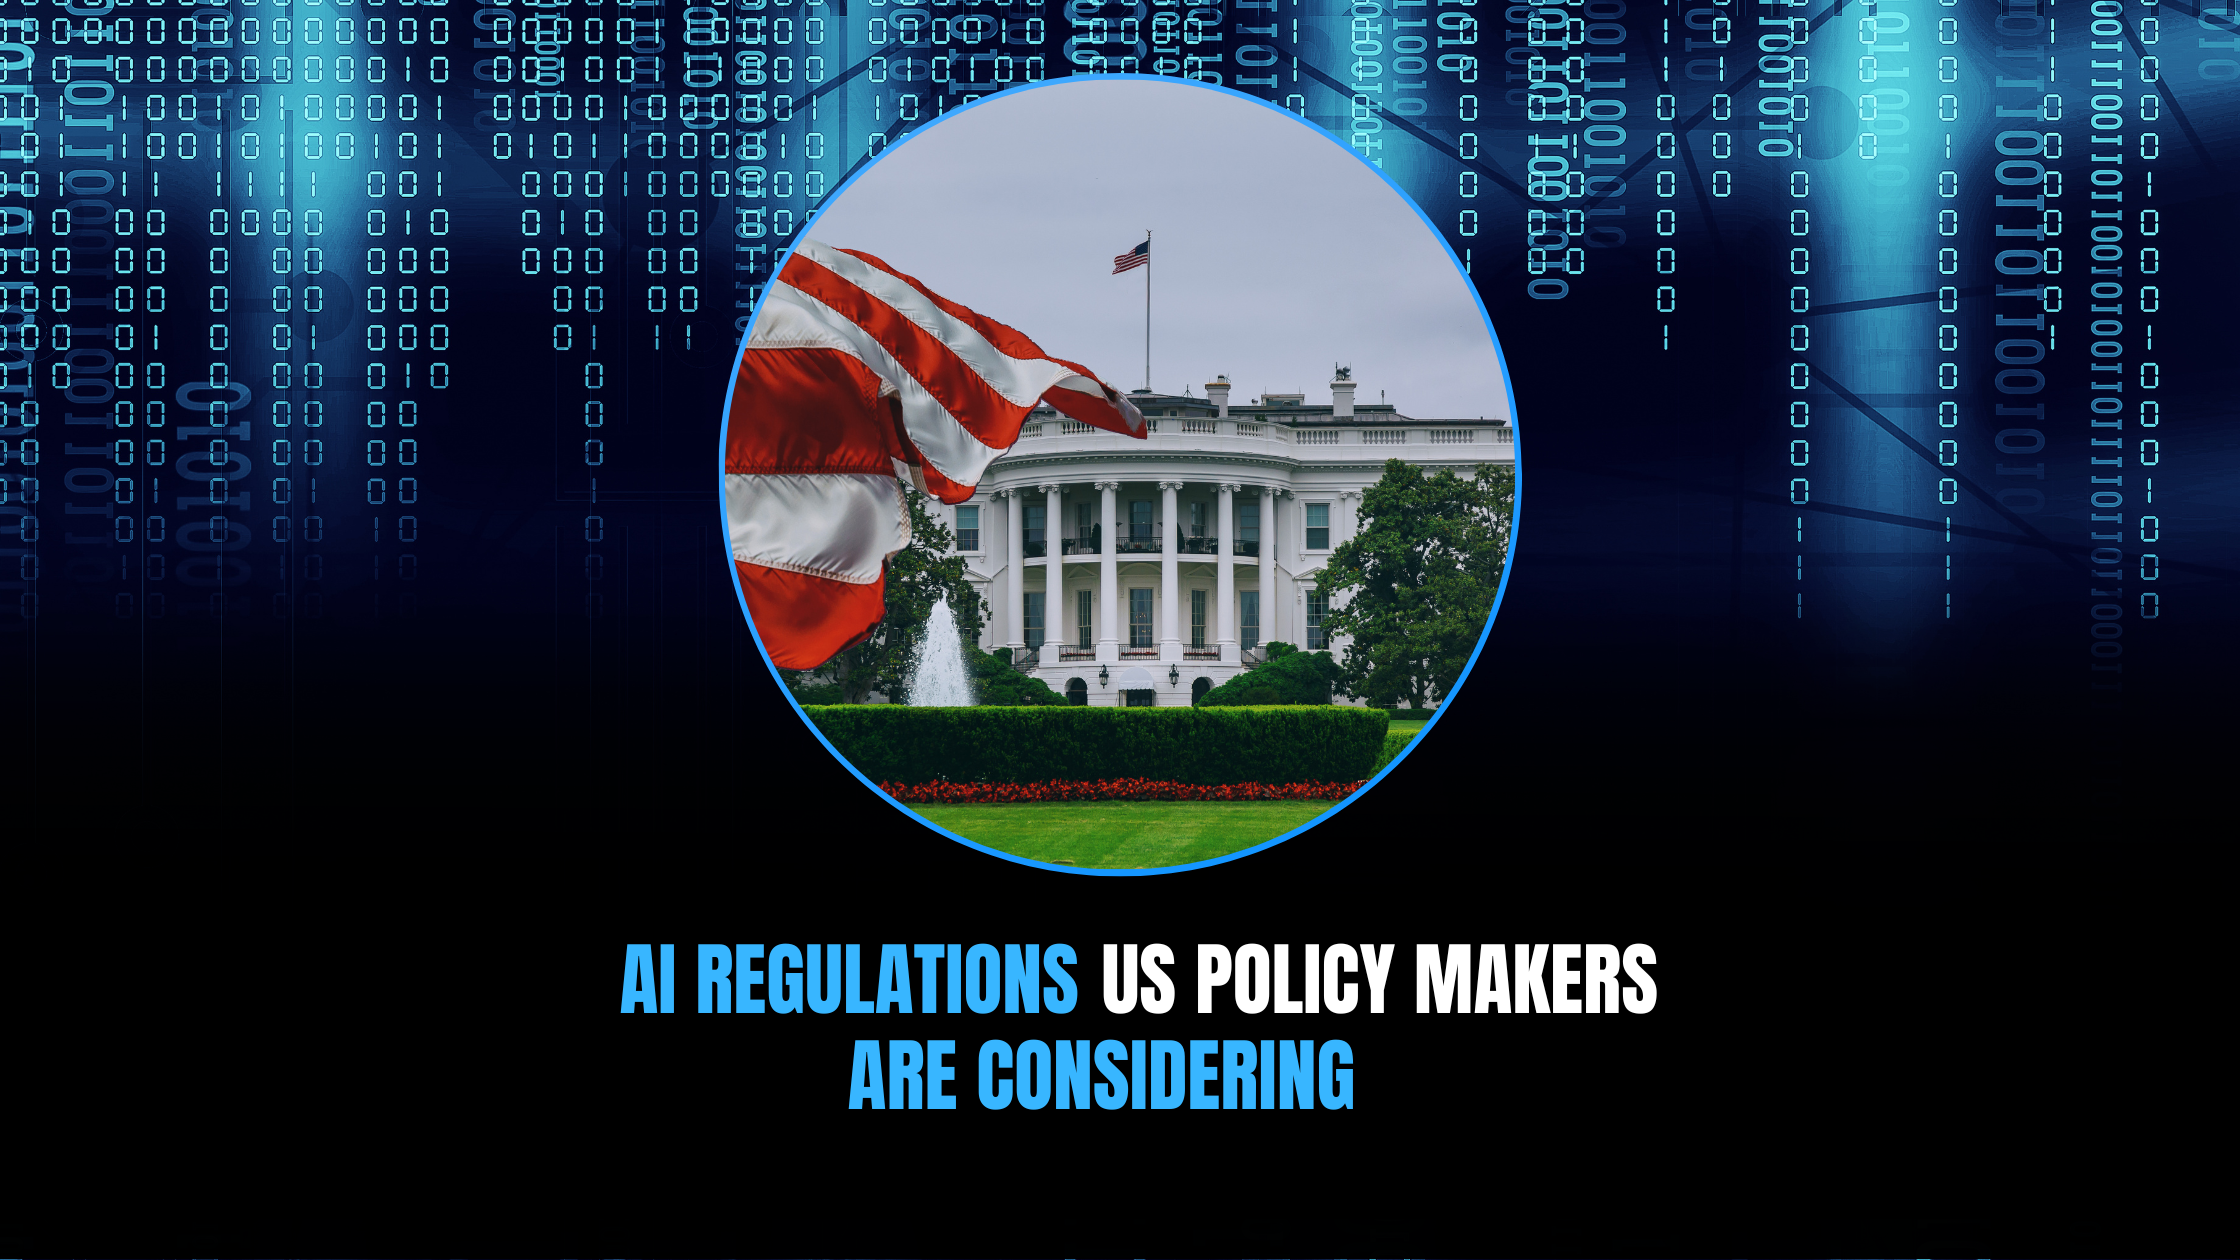 News Article, AI Regulations Being Considered By US Policymakers Summarized